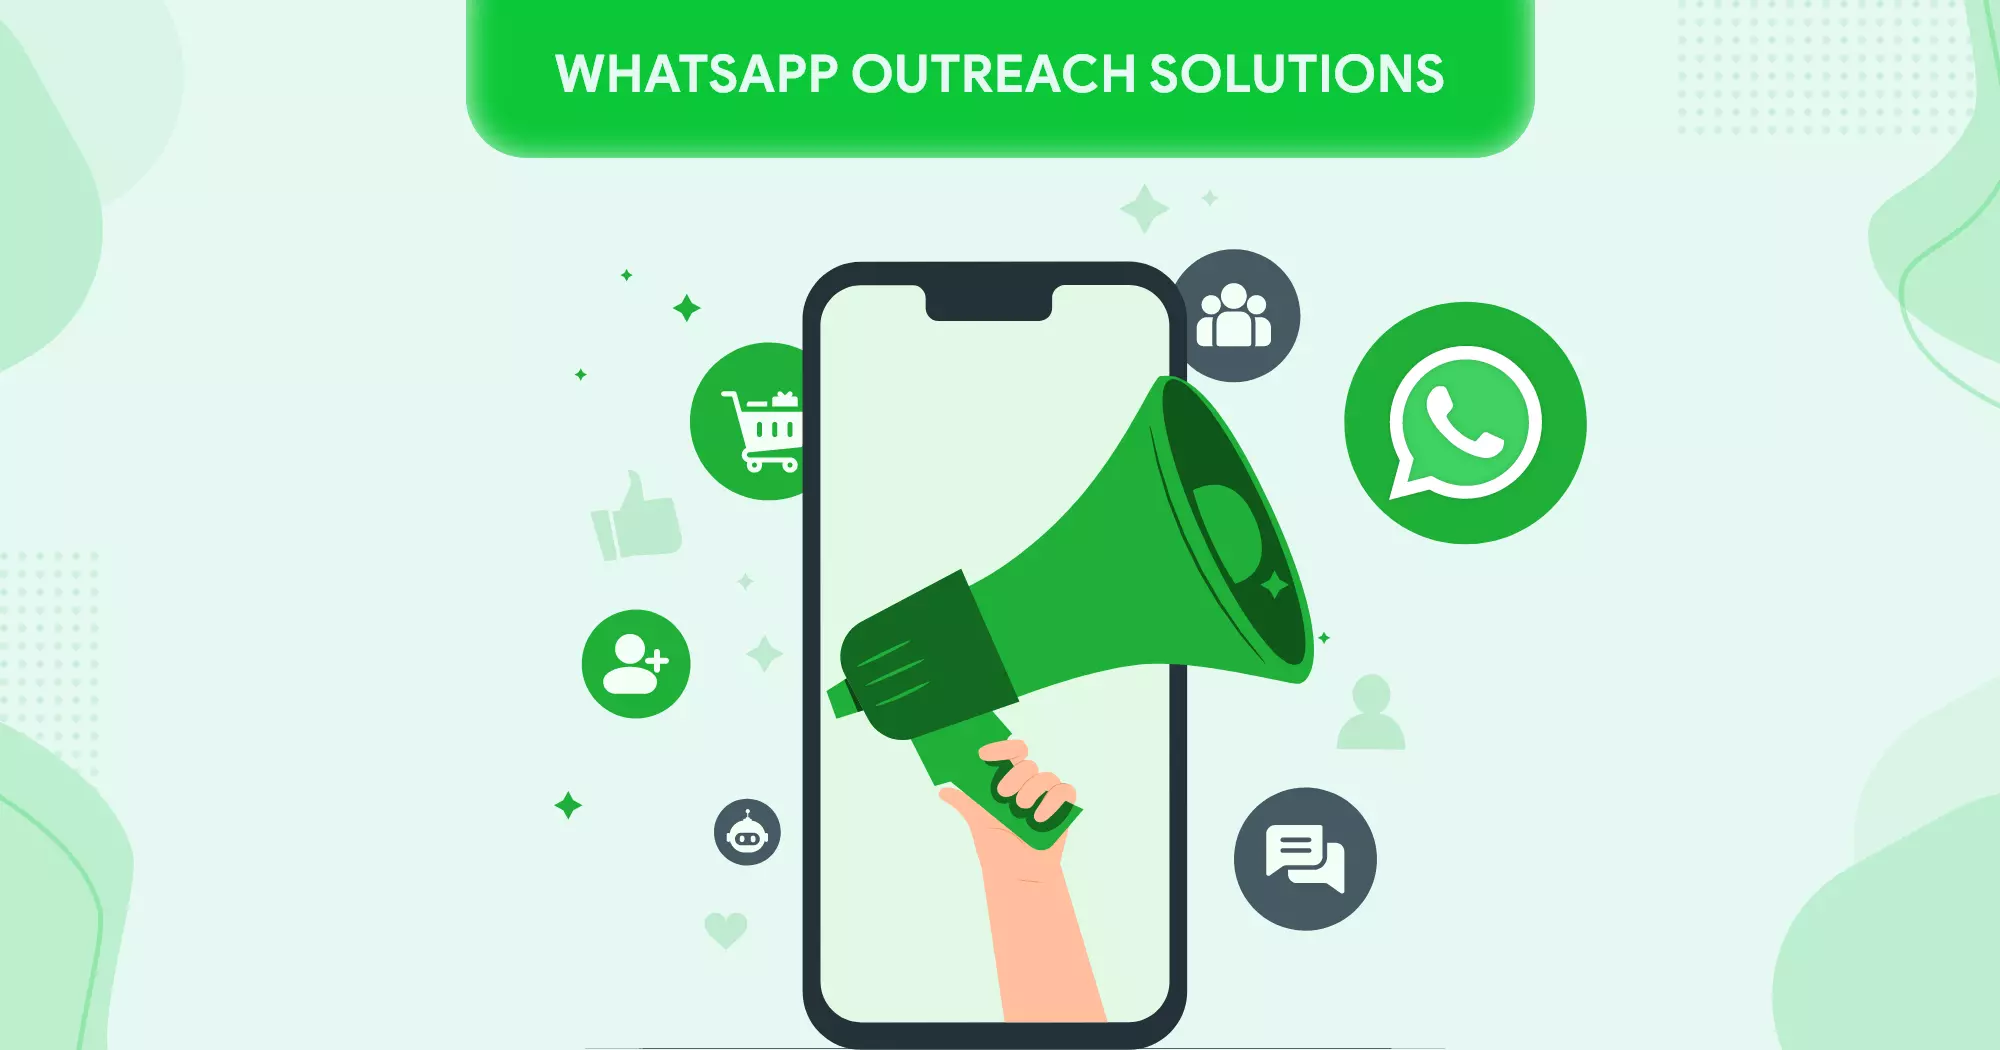 WhatsApp Outreach Solutions for your Business